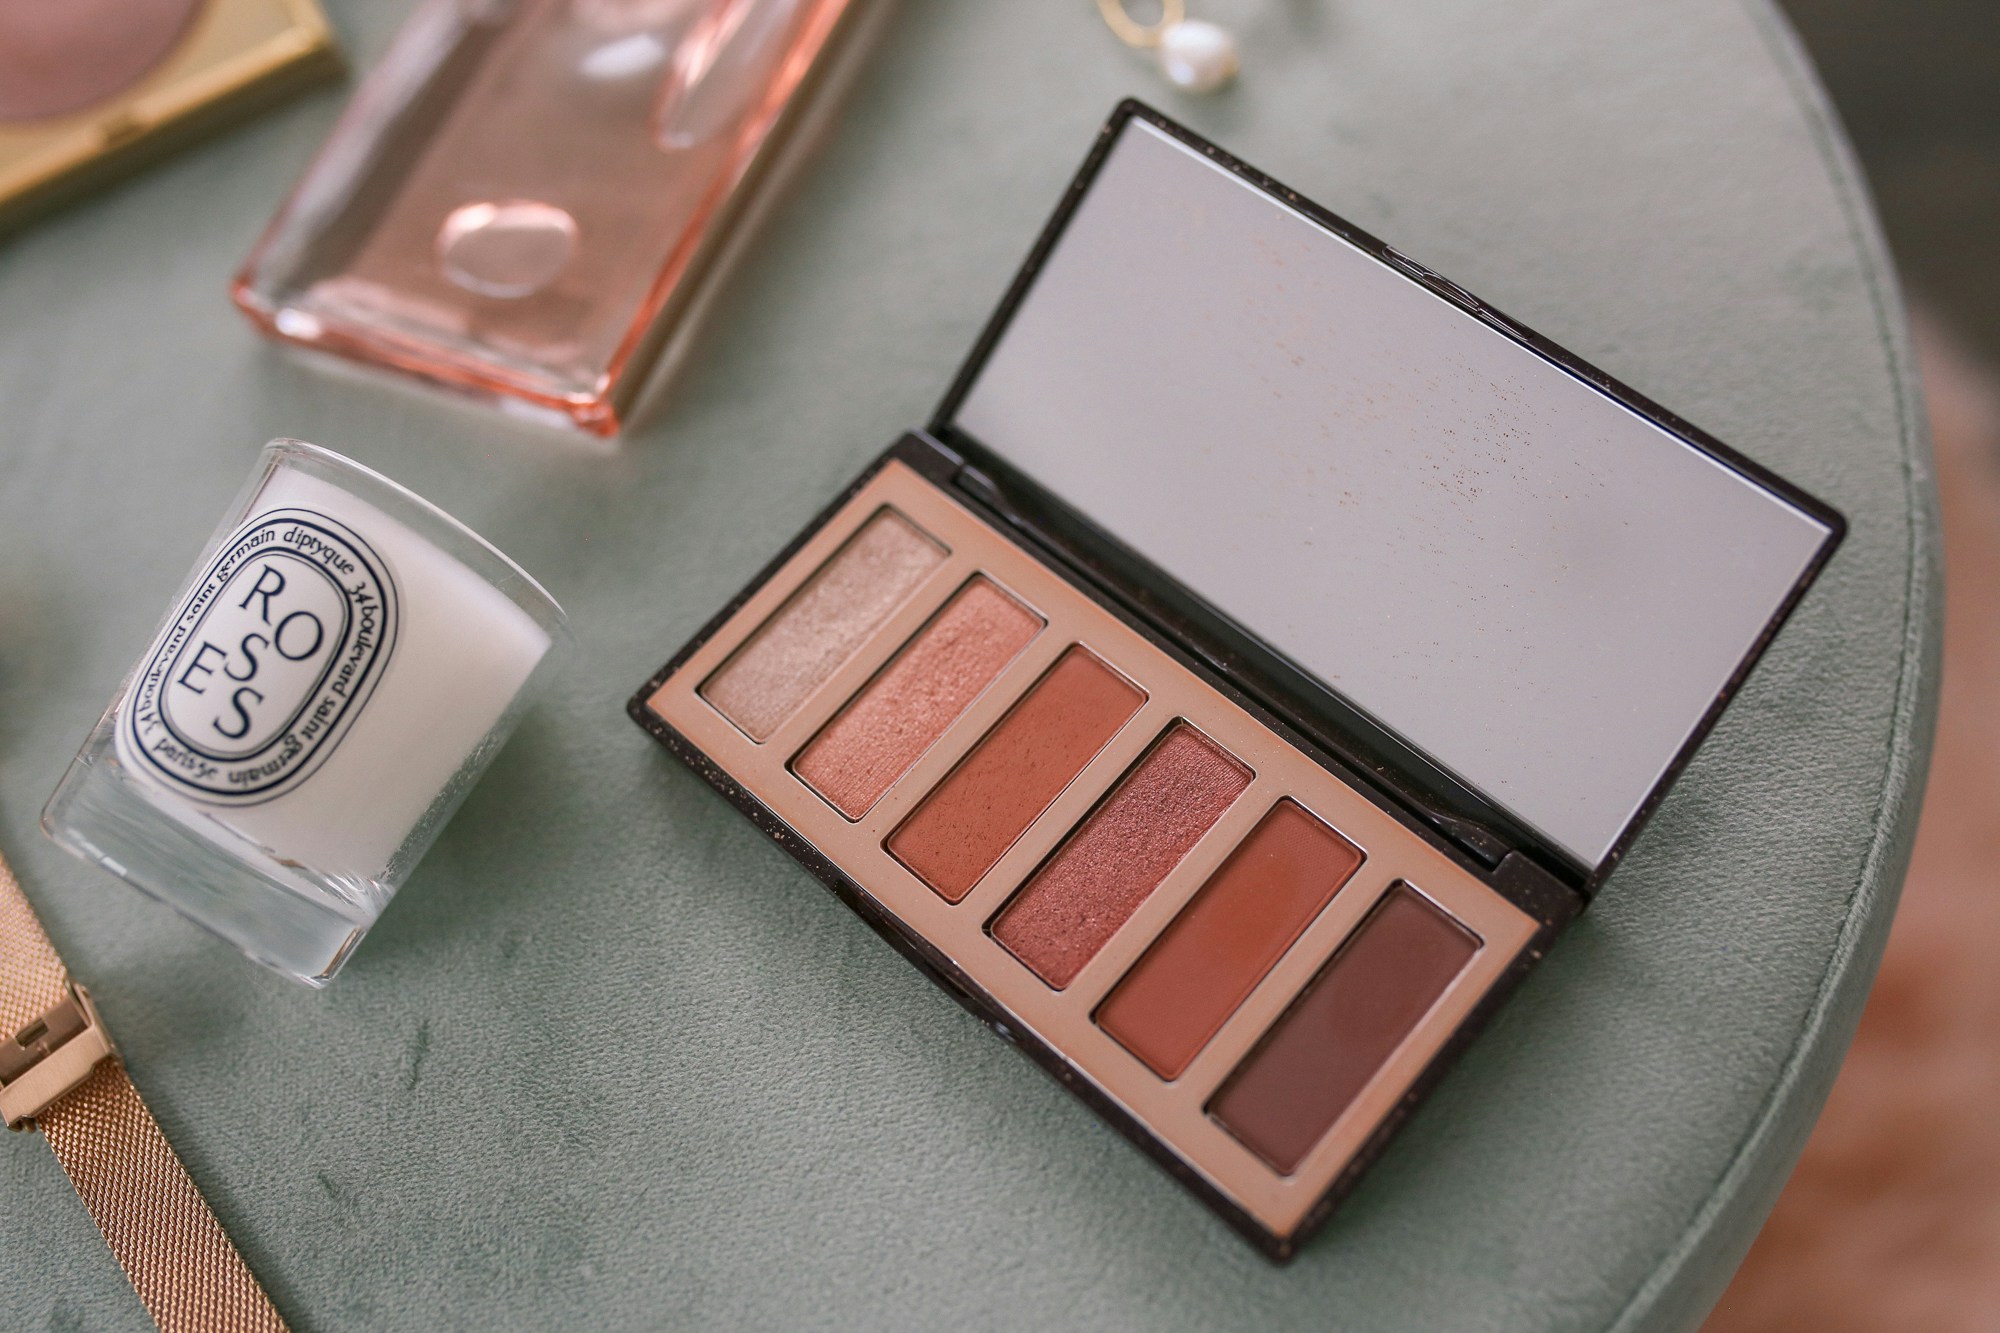 Charlotte Tilbury Darling Eyeshadow Palette Review: This eye palette contains 6 shades for two eye looks. The metallics are stunning, while the mattes are highly pigmented.